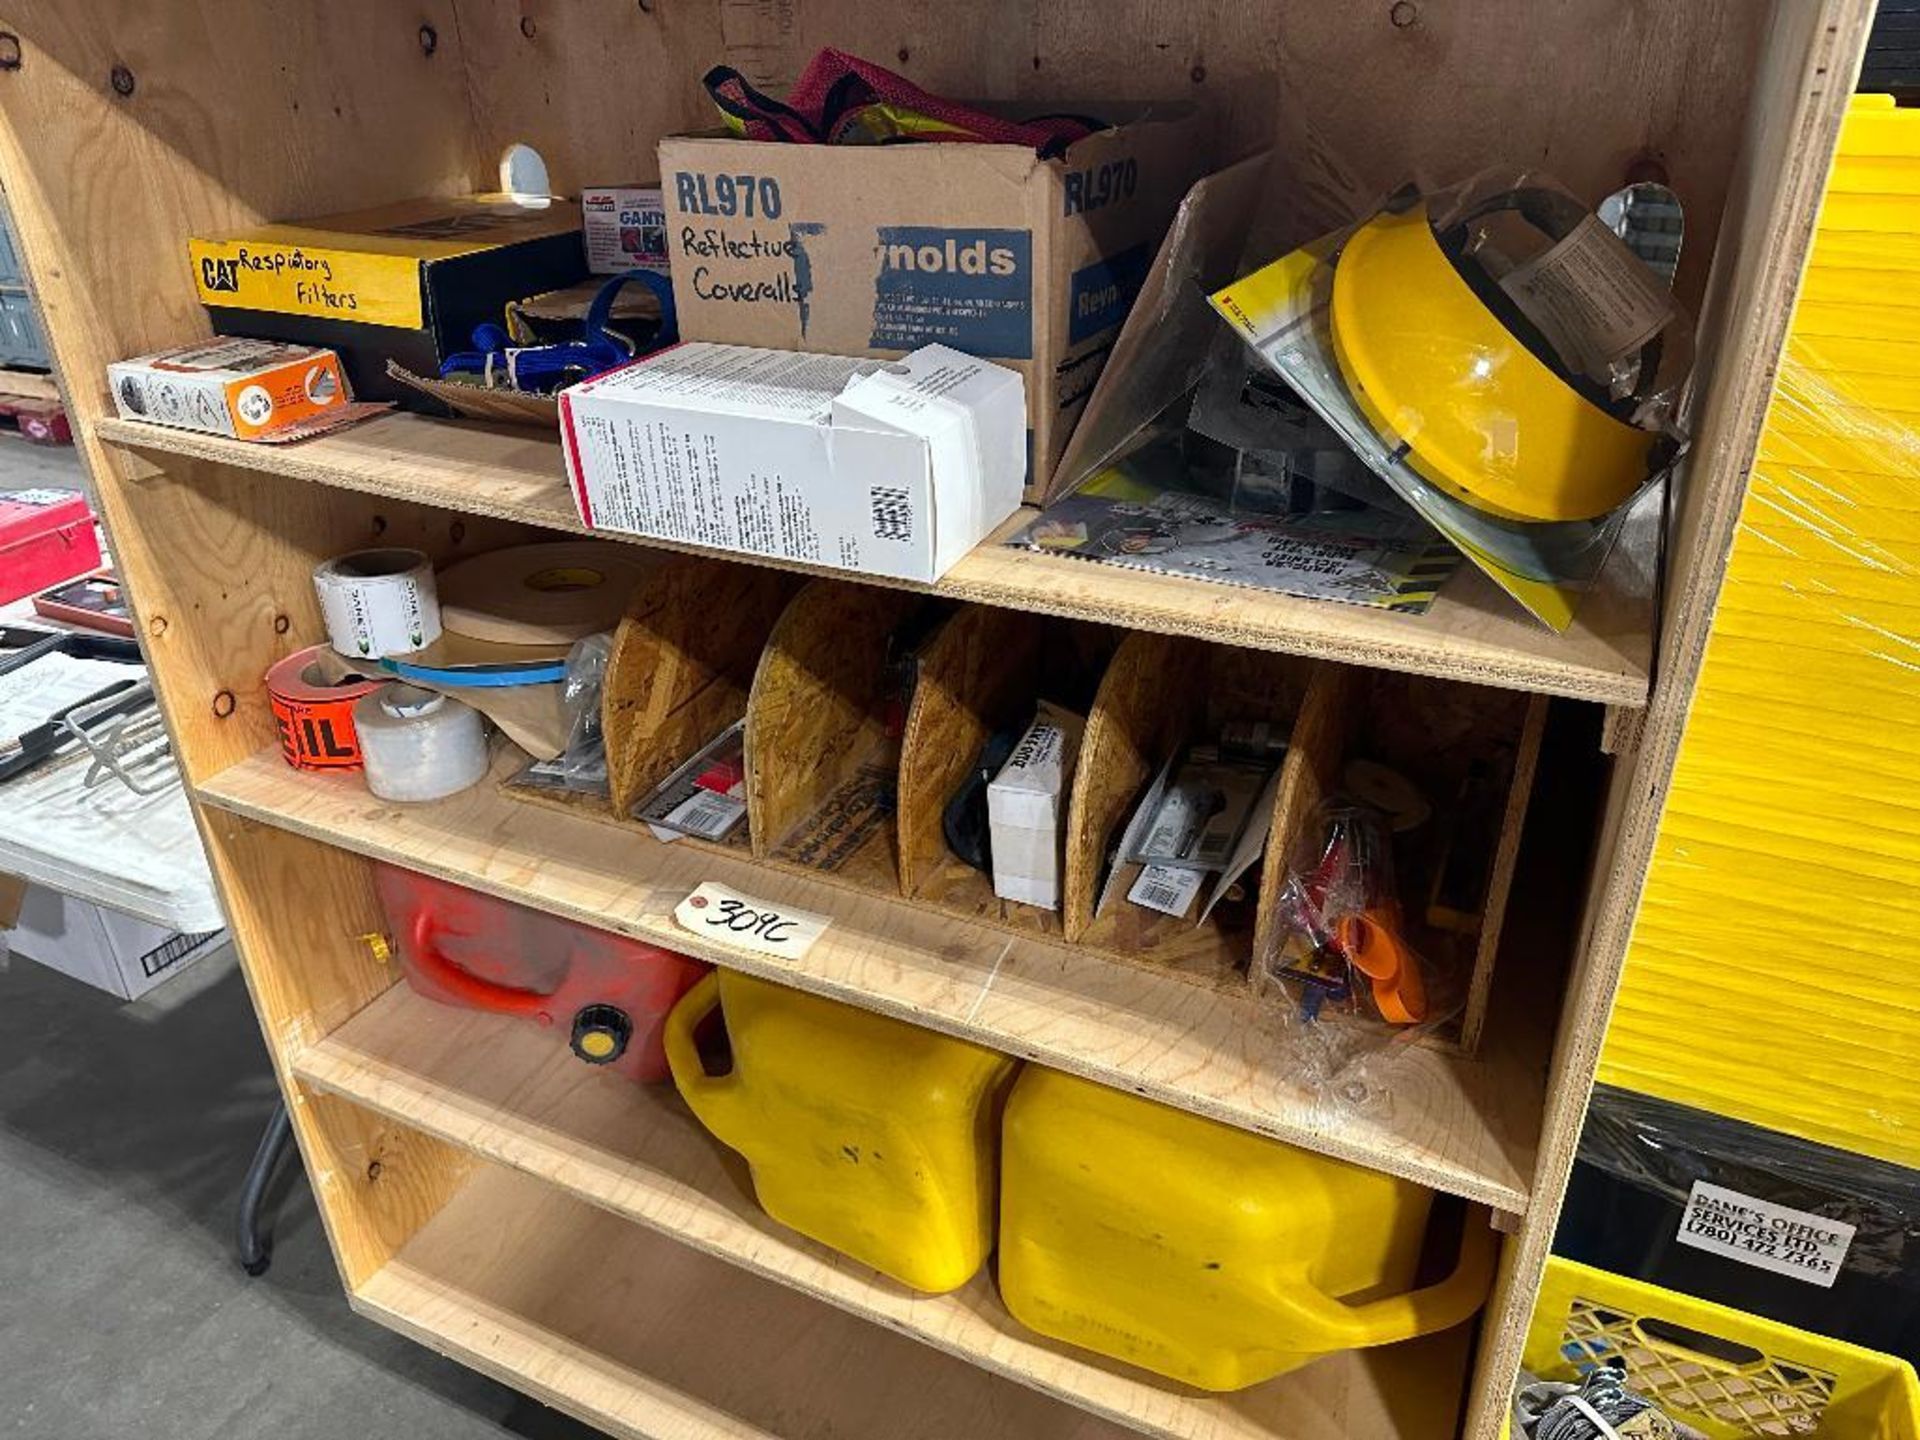 Contents of Wooden Shelf including Fuel Cans, Face Shield Headgear, Straps, etc. - Image 3 of 4